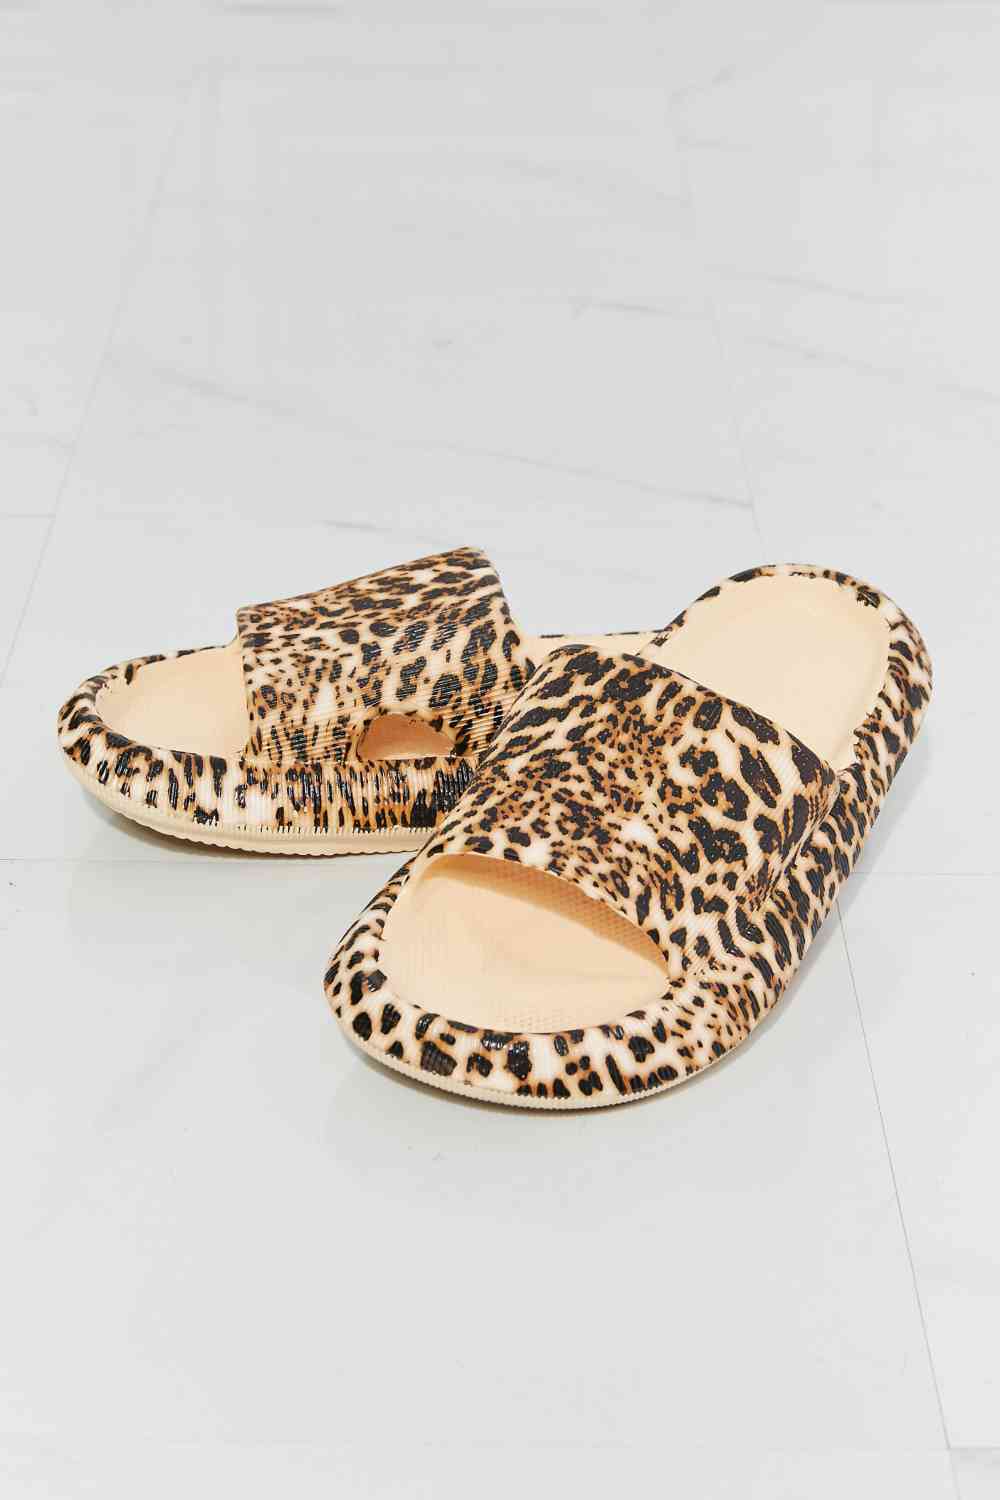 MMShoes Arms Around Me Open Toe Slide in Leopard - BloomBliss.com